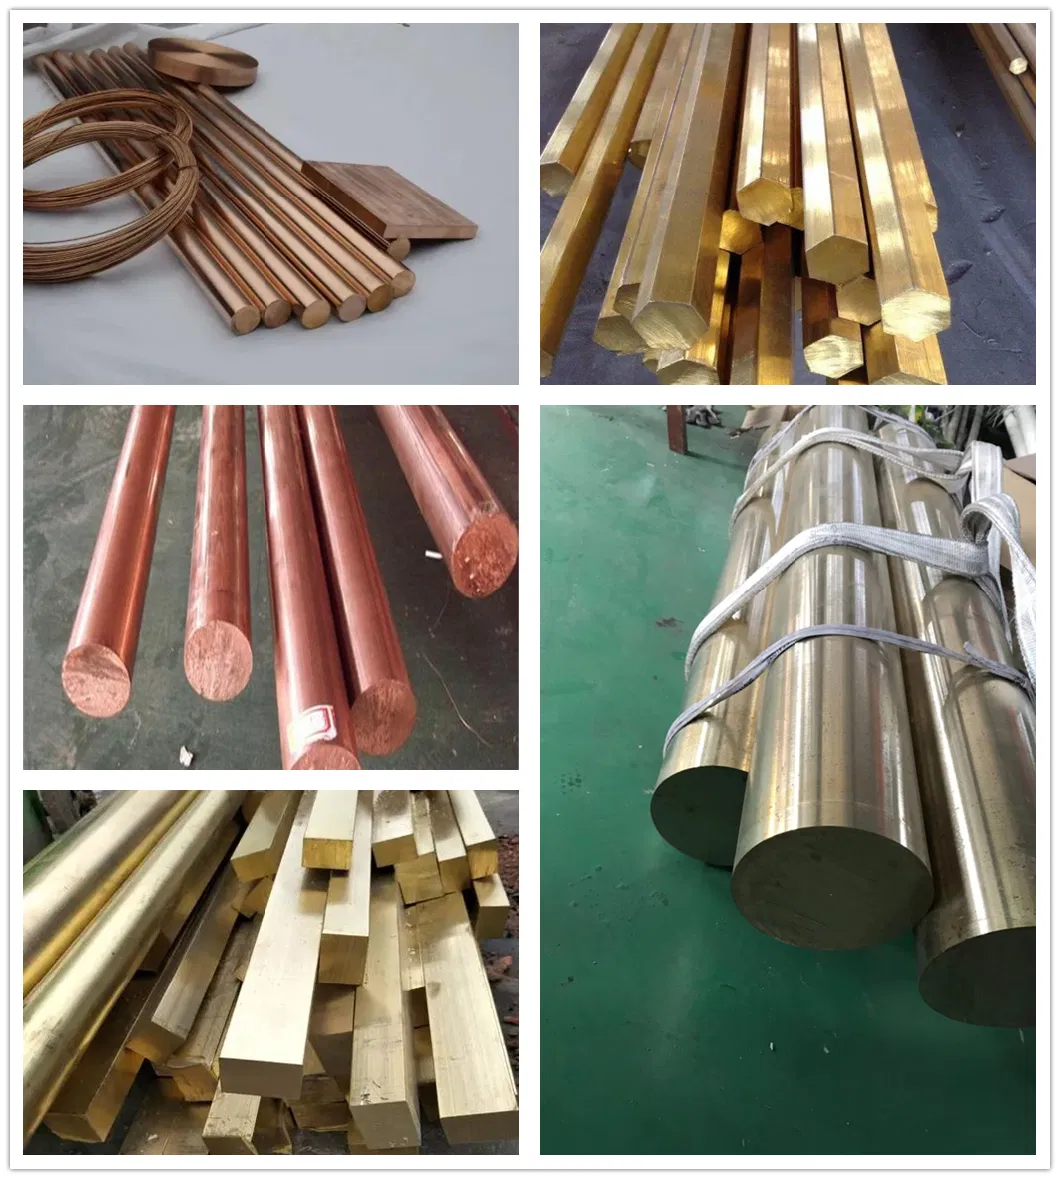 Copper Nickel Alloy CuNi44 Bar Best Price on Hot Sale